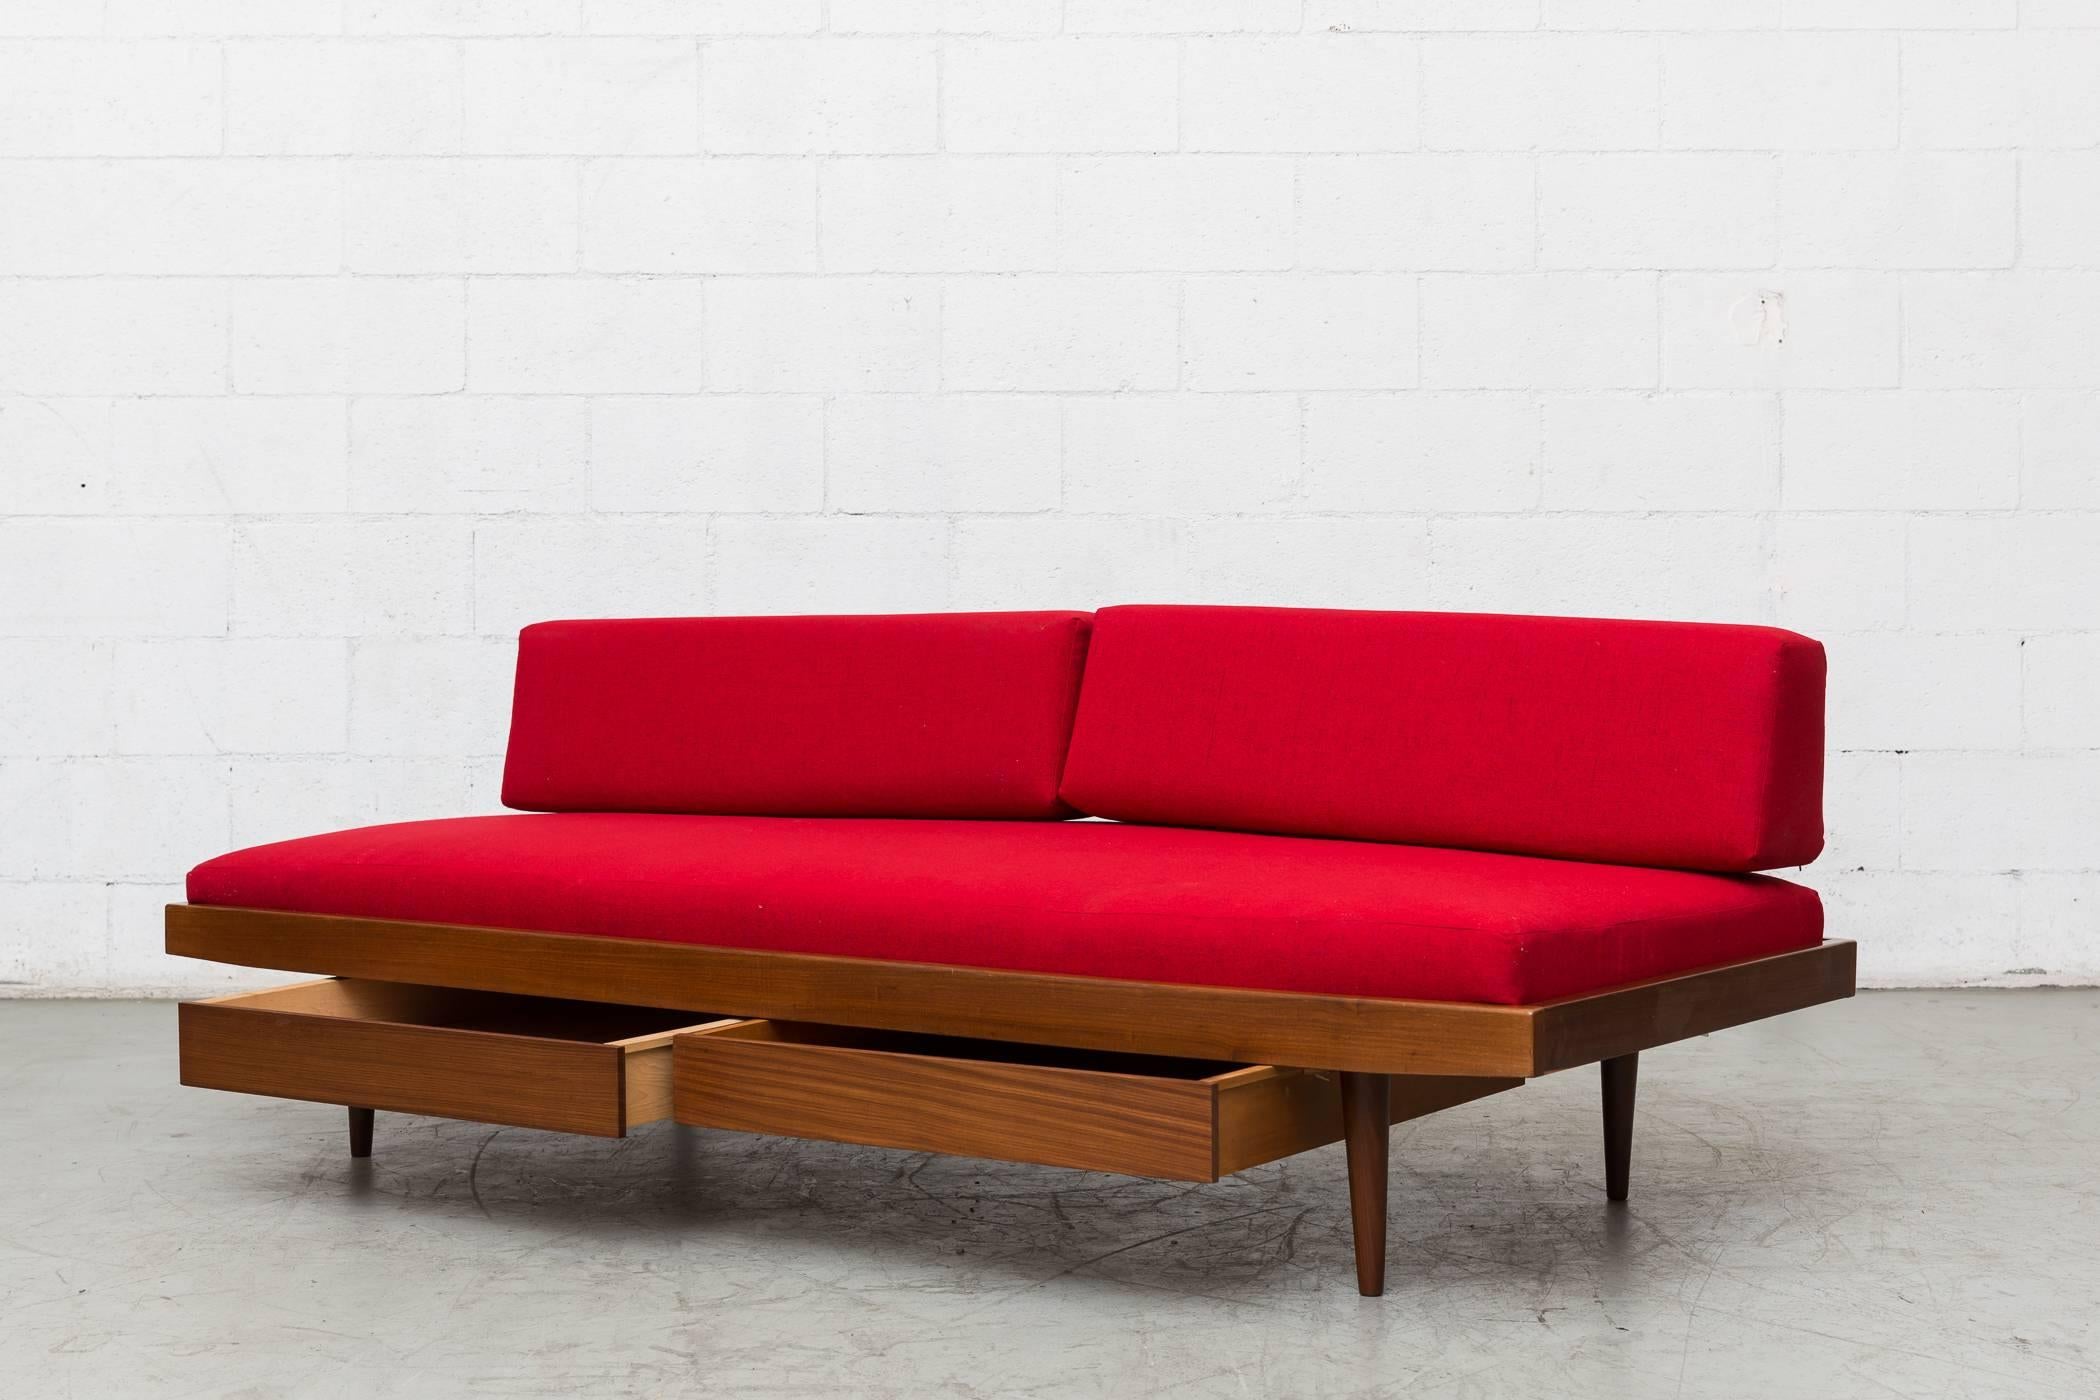 Charlotte Perriand inspired midcentury daybed with tapered legs, double storage drawers and new lipstick red upholstered mattress and bolsters. Has pegboard support. Good original condition, lightly refinished. Others available in different color